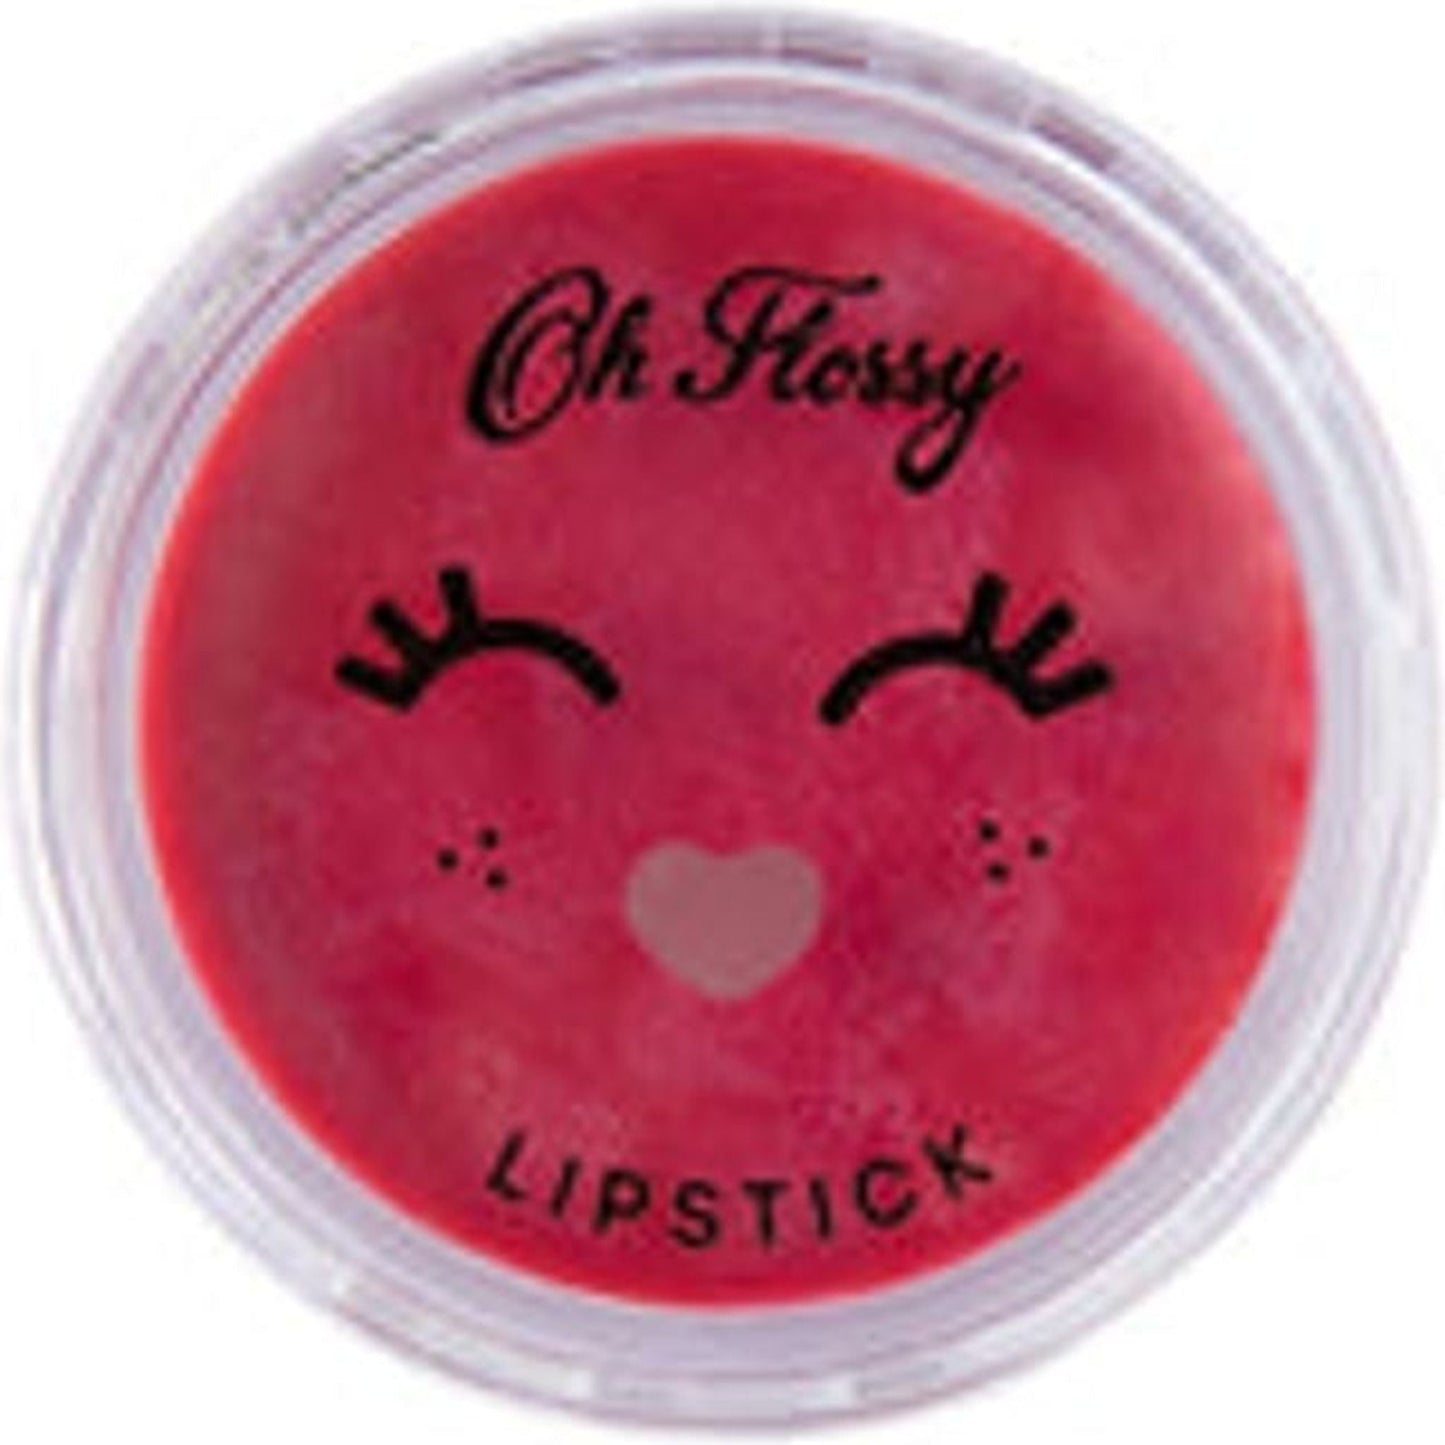 Oh Flossy Sweet Treat Makeup Set - Toybox Tales